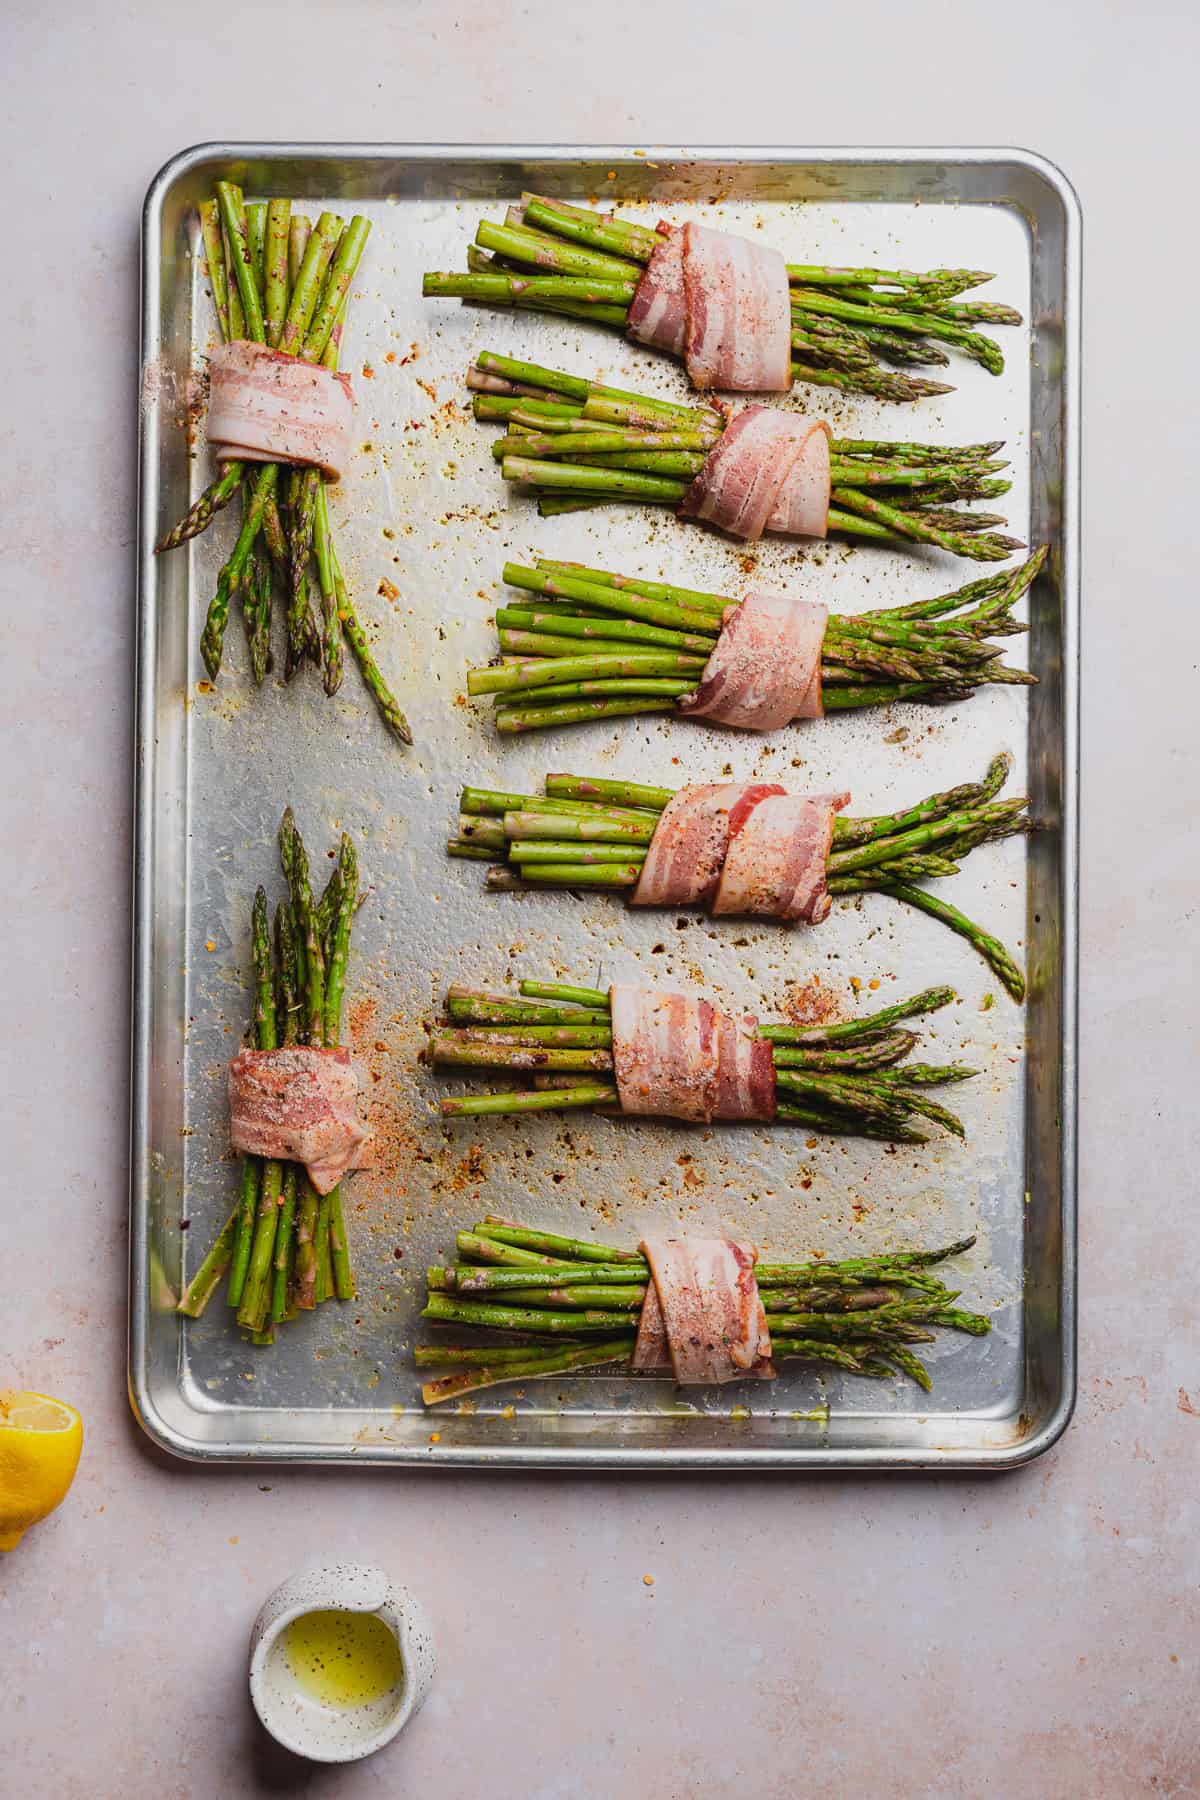 8 asparagus bundles wrapped in a strip of bacon